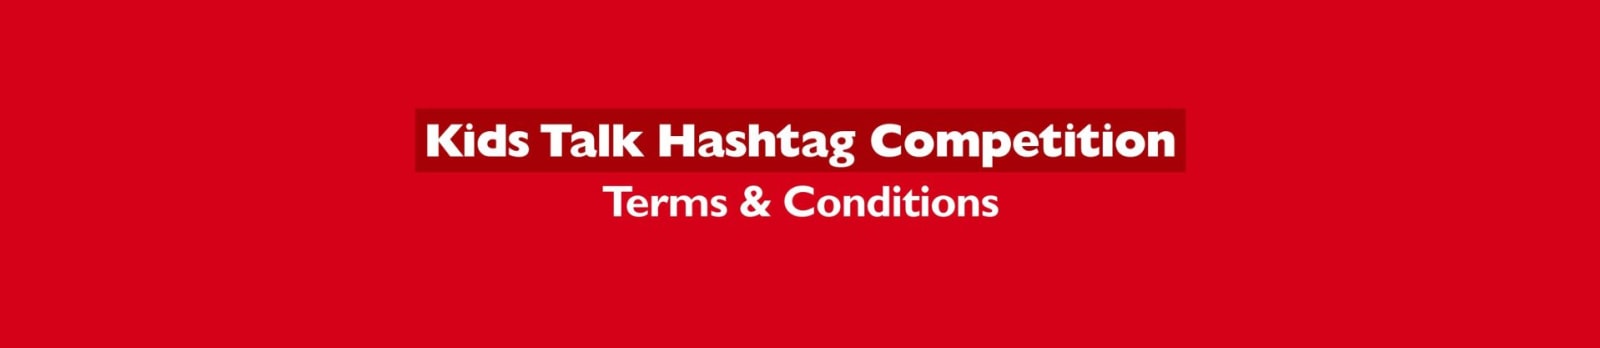 Kids Talk Hashtag Competition - Terms & Conditions